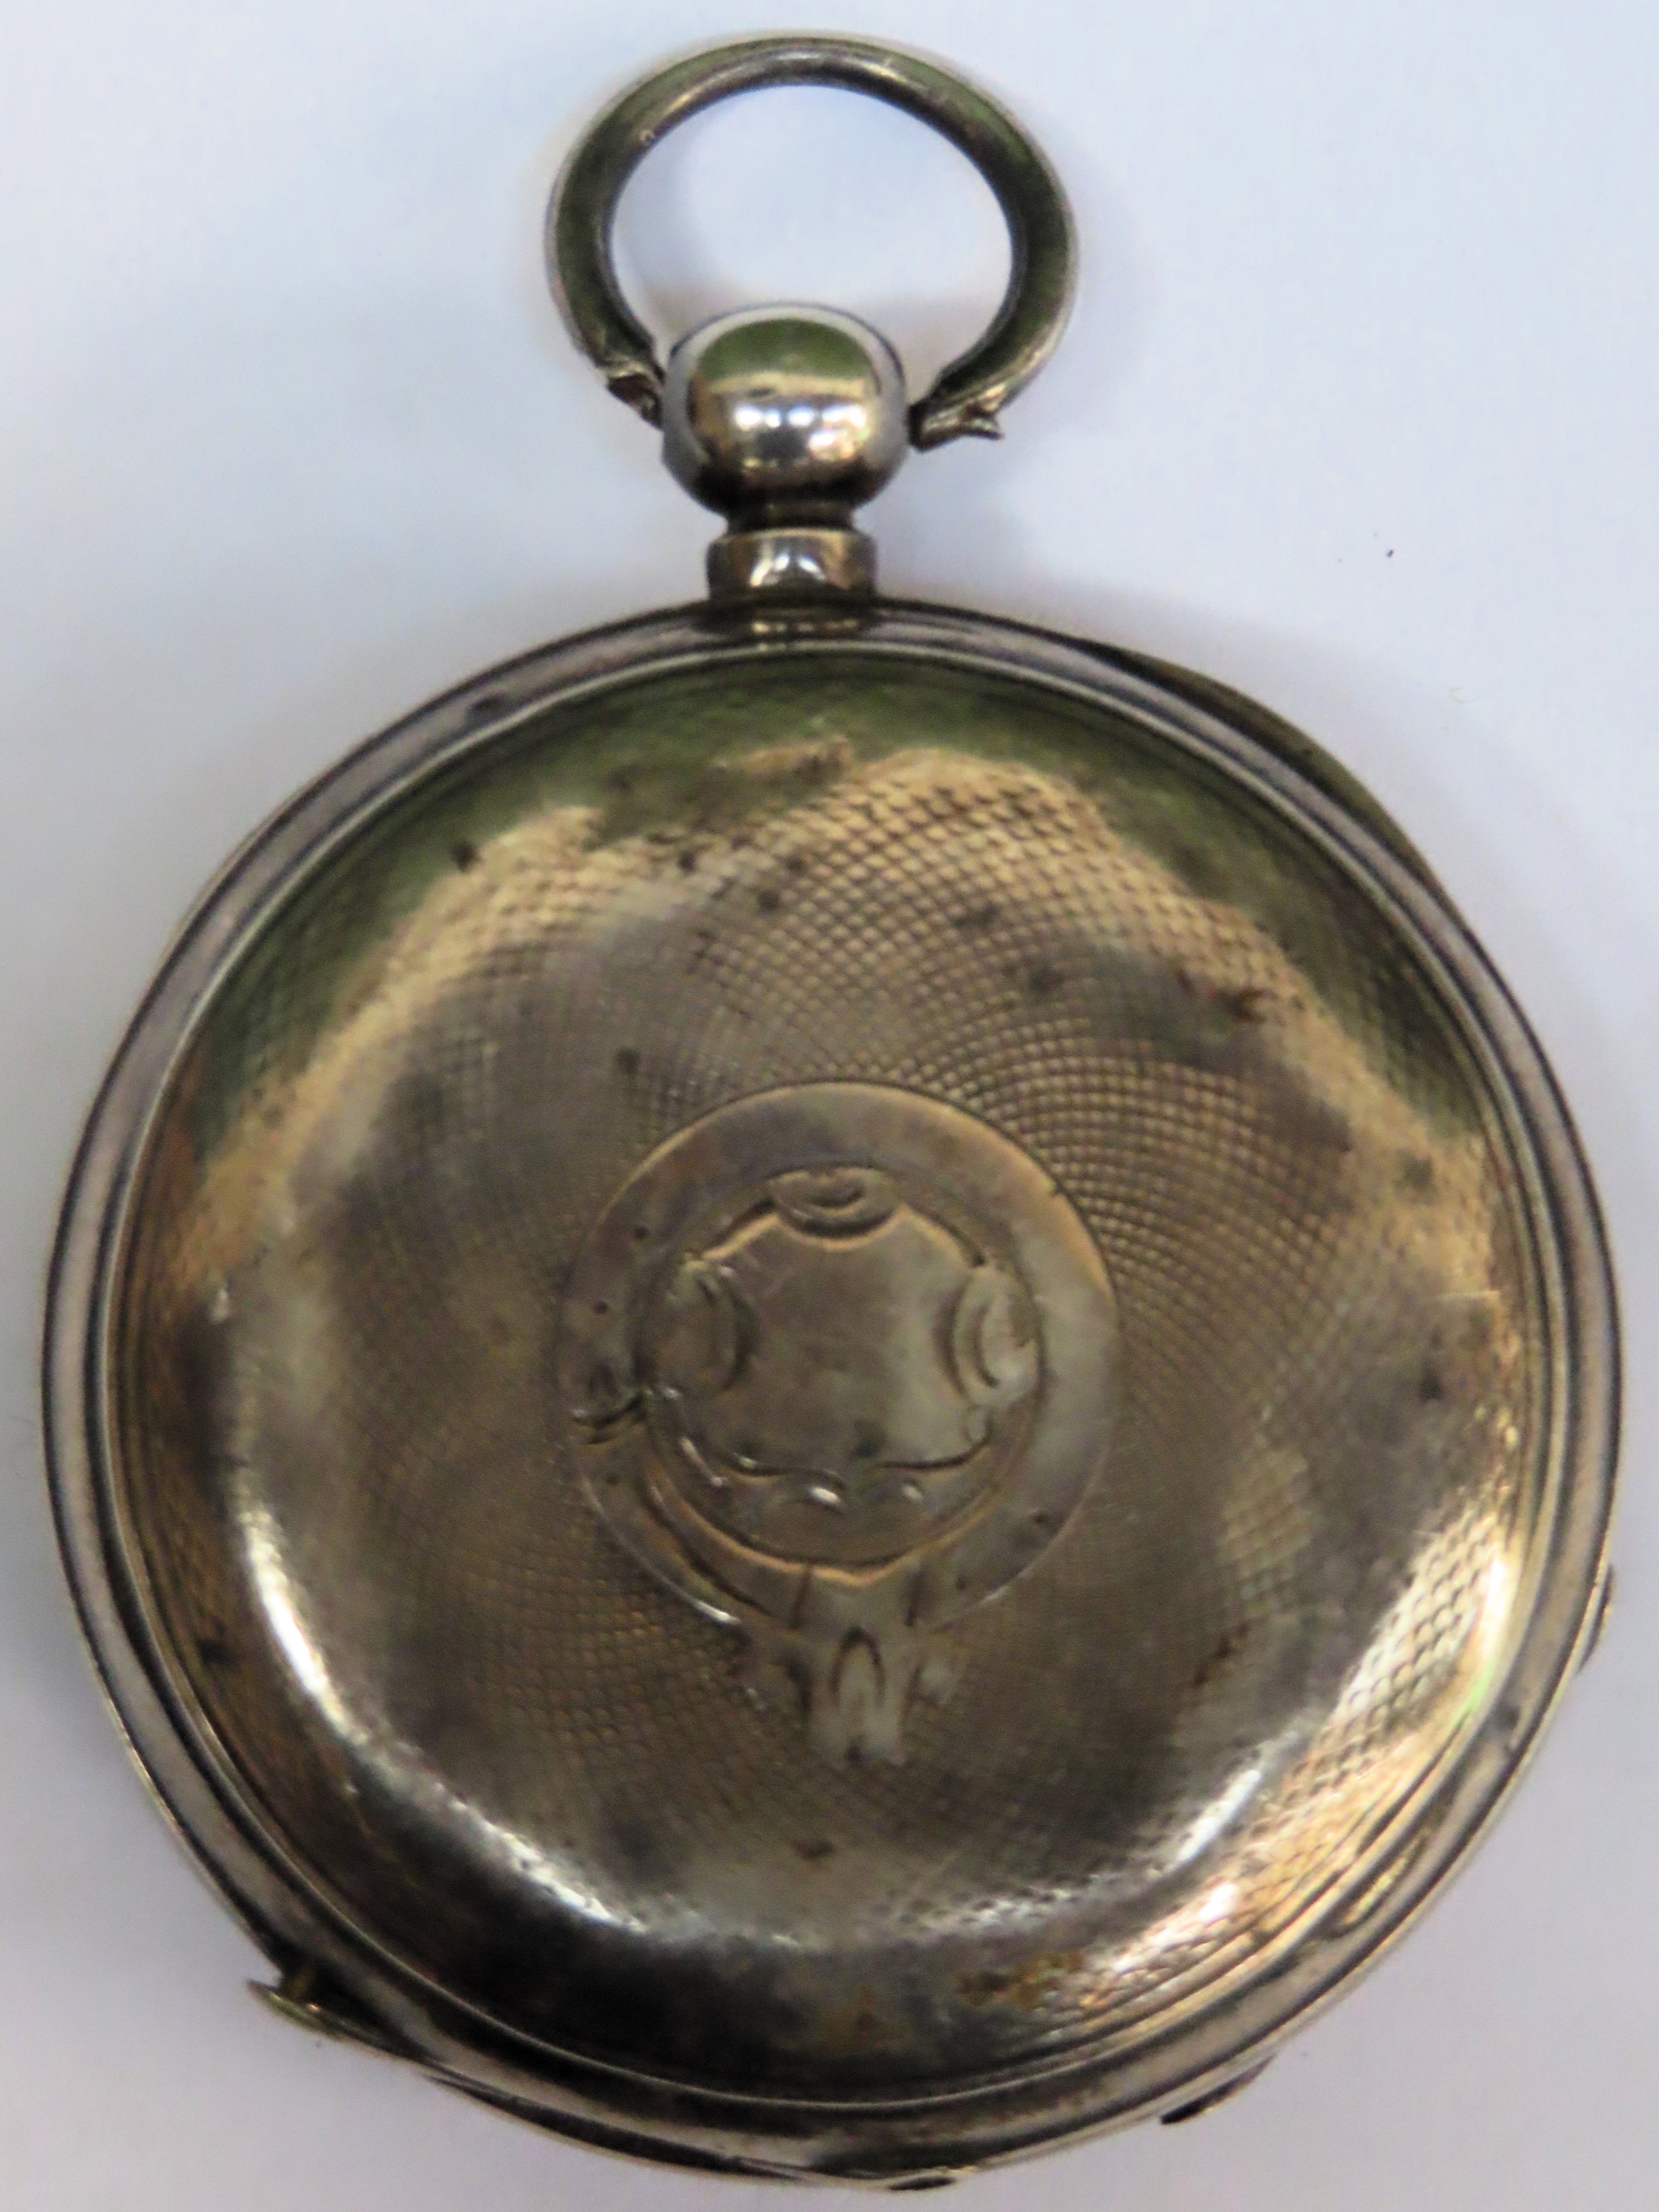 Hallmarked Silver The Columbia Watch (TCW) pocket watch Used condition, various crack to dial - Image 2 of 2